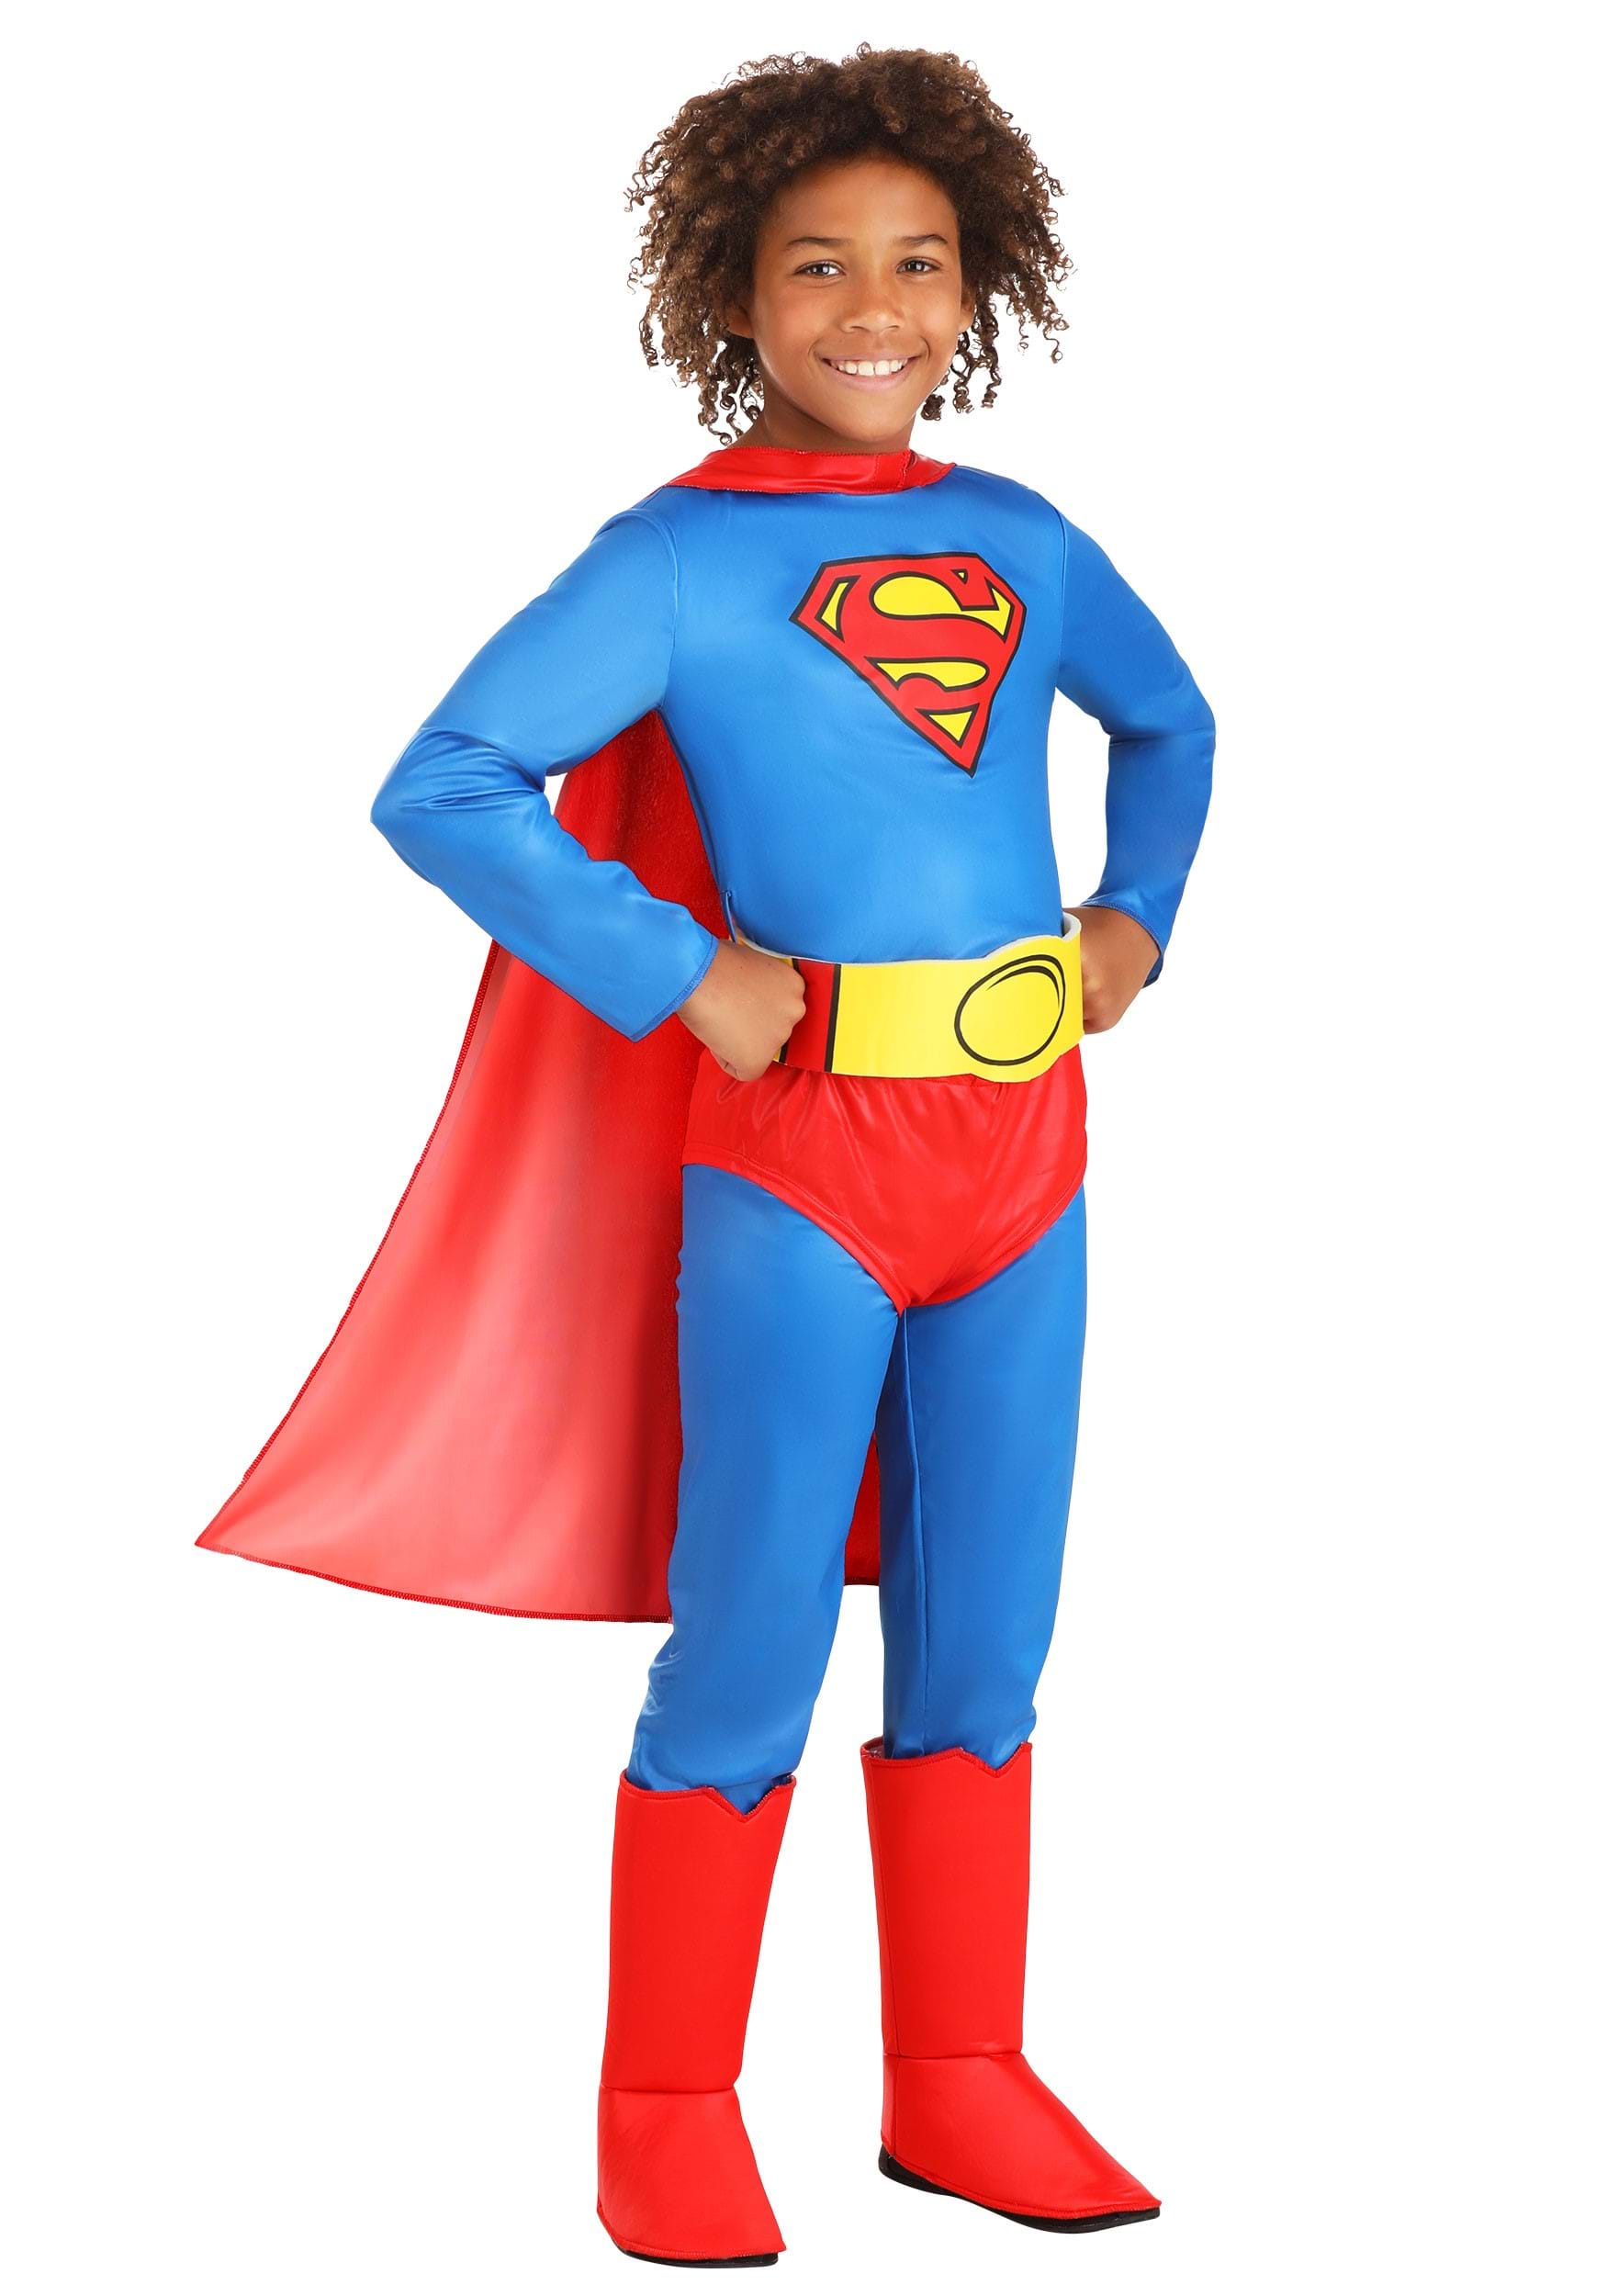 Photos - Fancy Dress Classic Jerry Leigh Kid's  Superman Costume Blue/Red/Yellow JLJLF10 